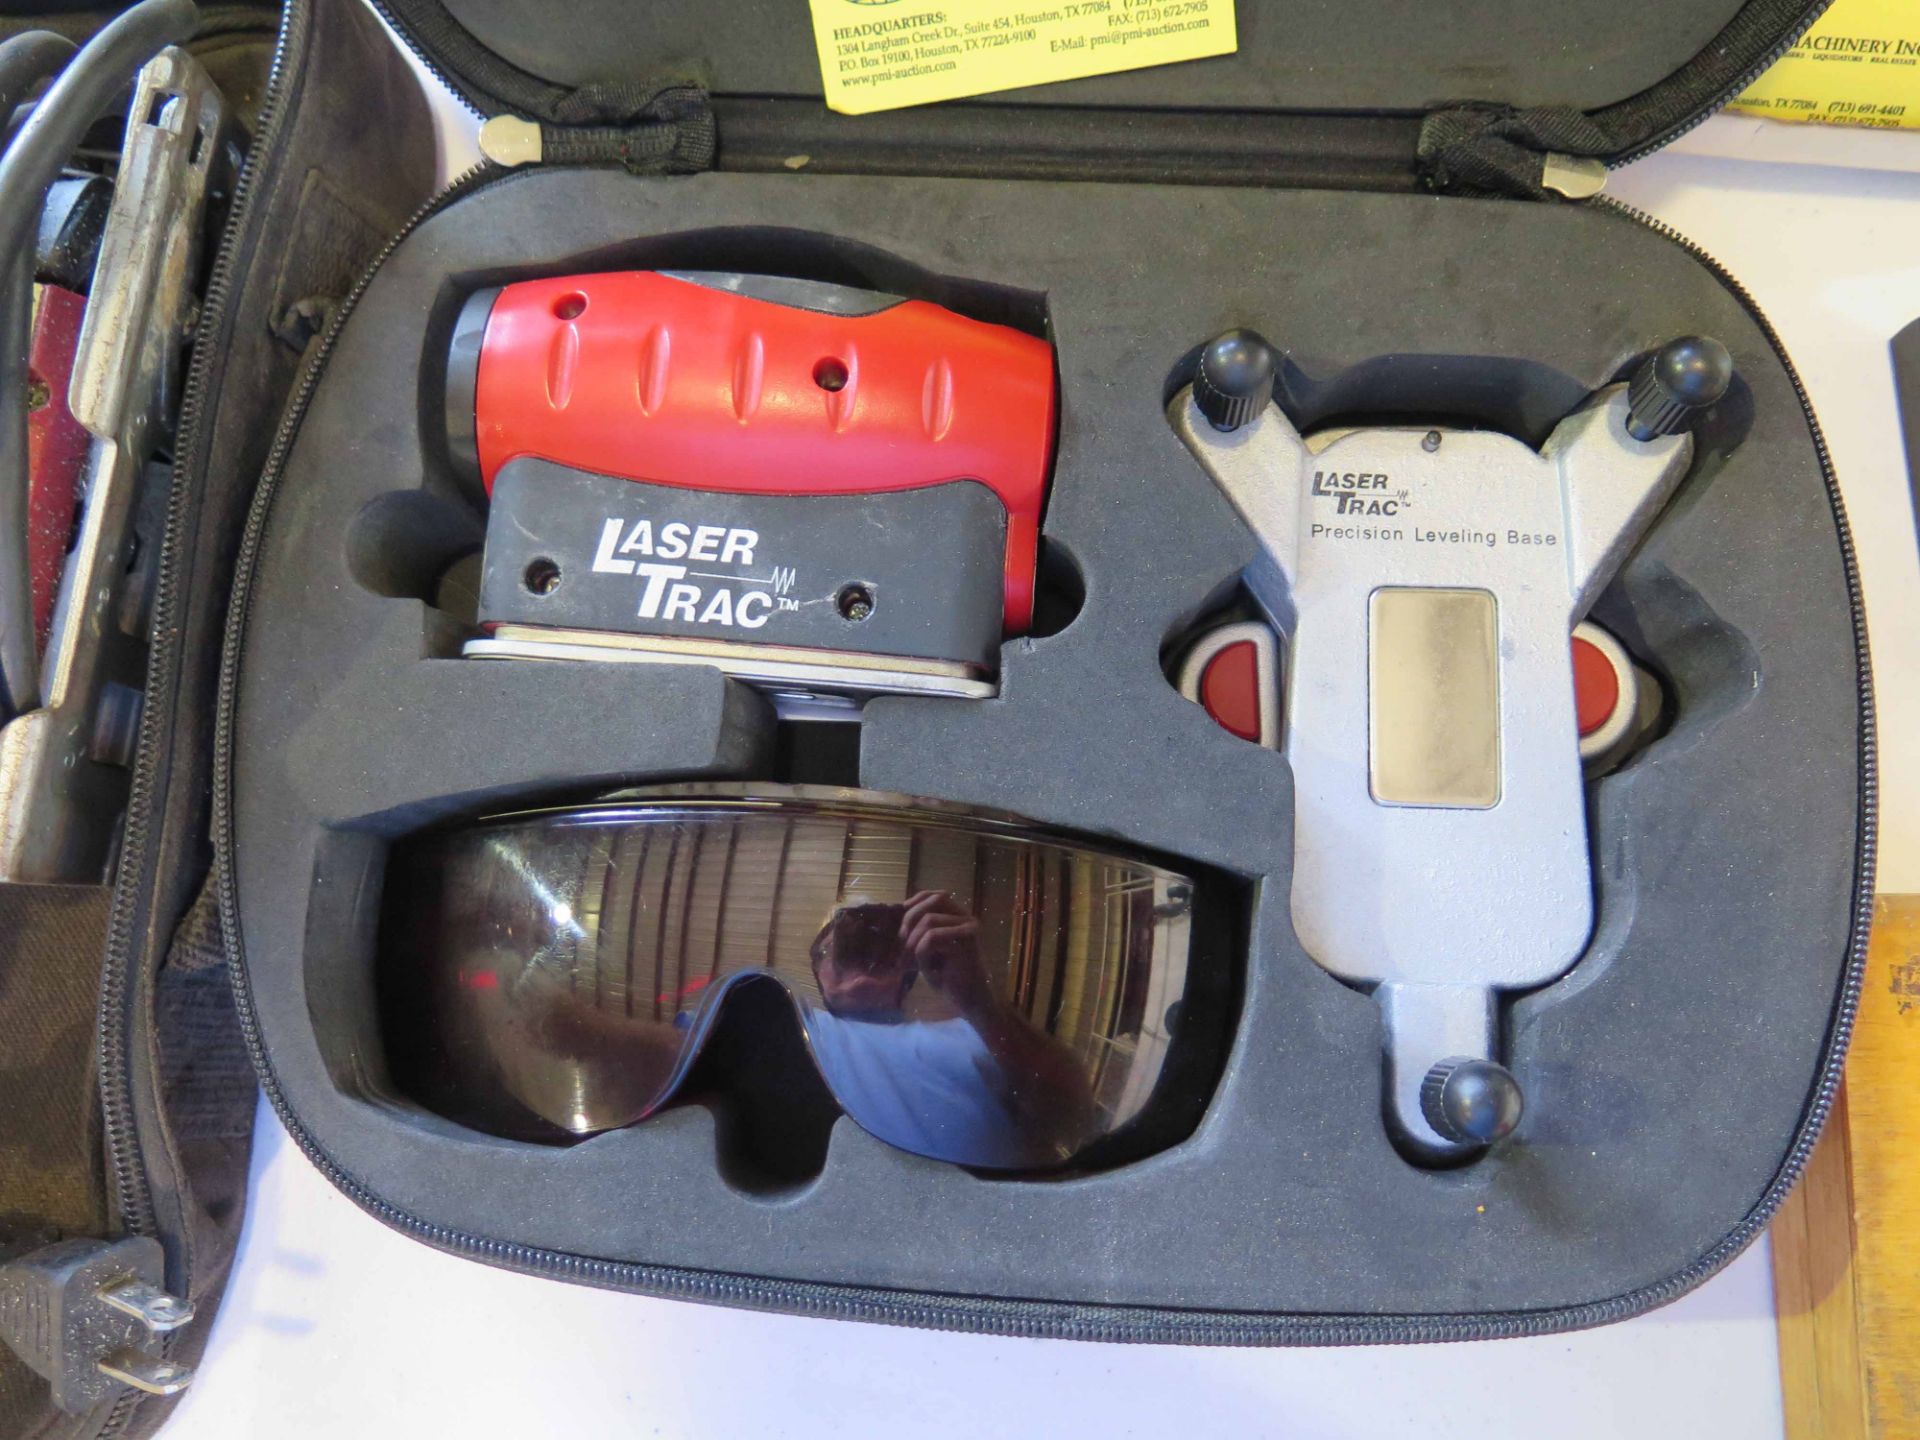 LOT CONSISTING OF: Craftsman Laser Trac level w/wall mtd. marking base, precision leveling base,